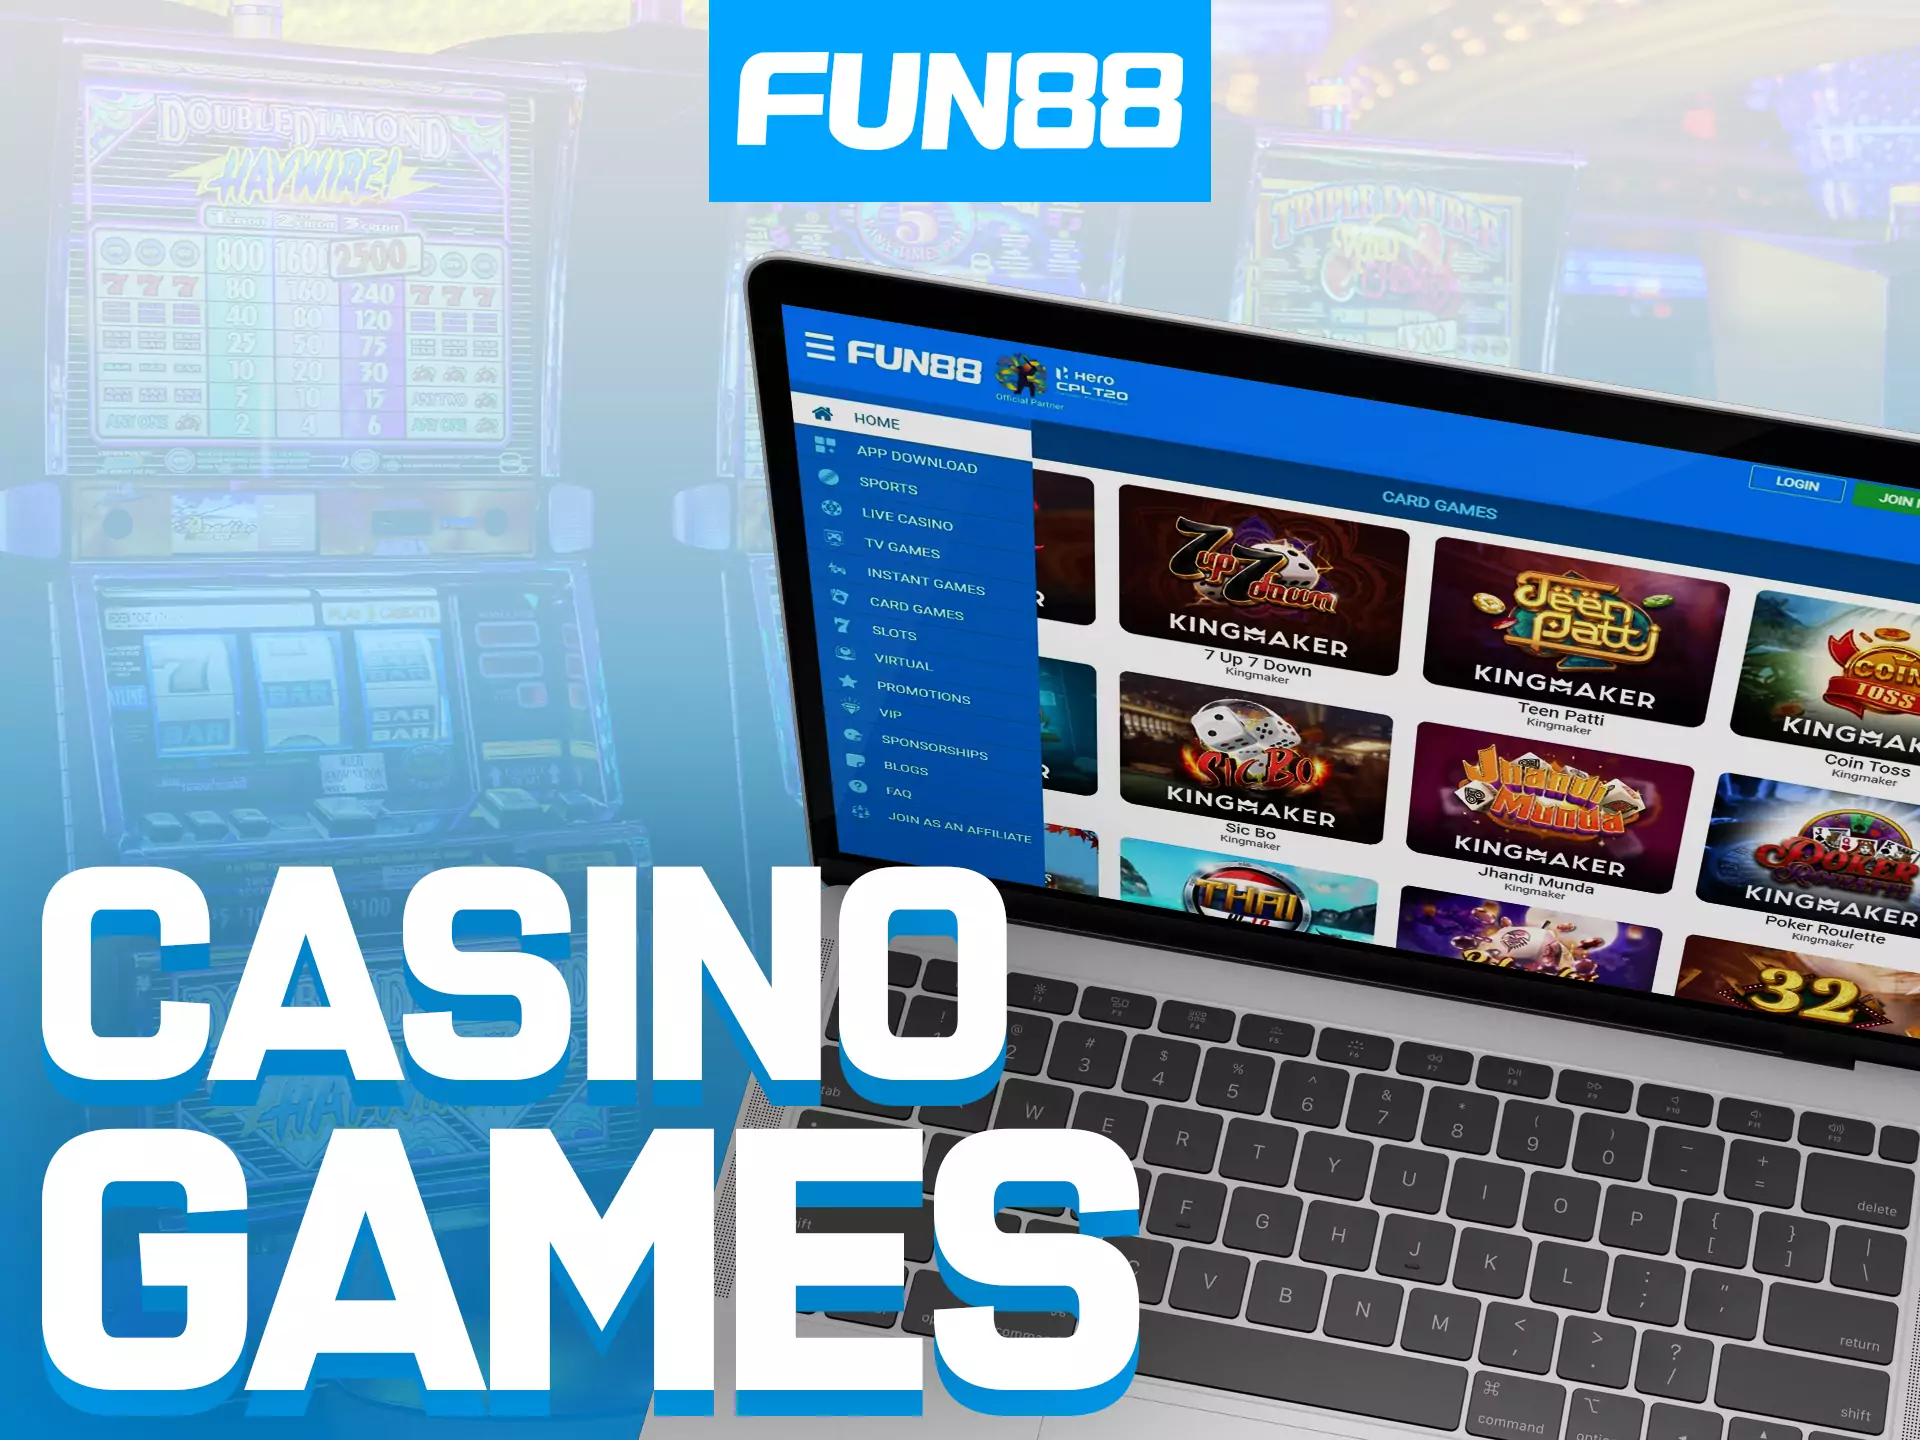 At Fun88 you can play a variety of casino games.